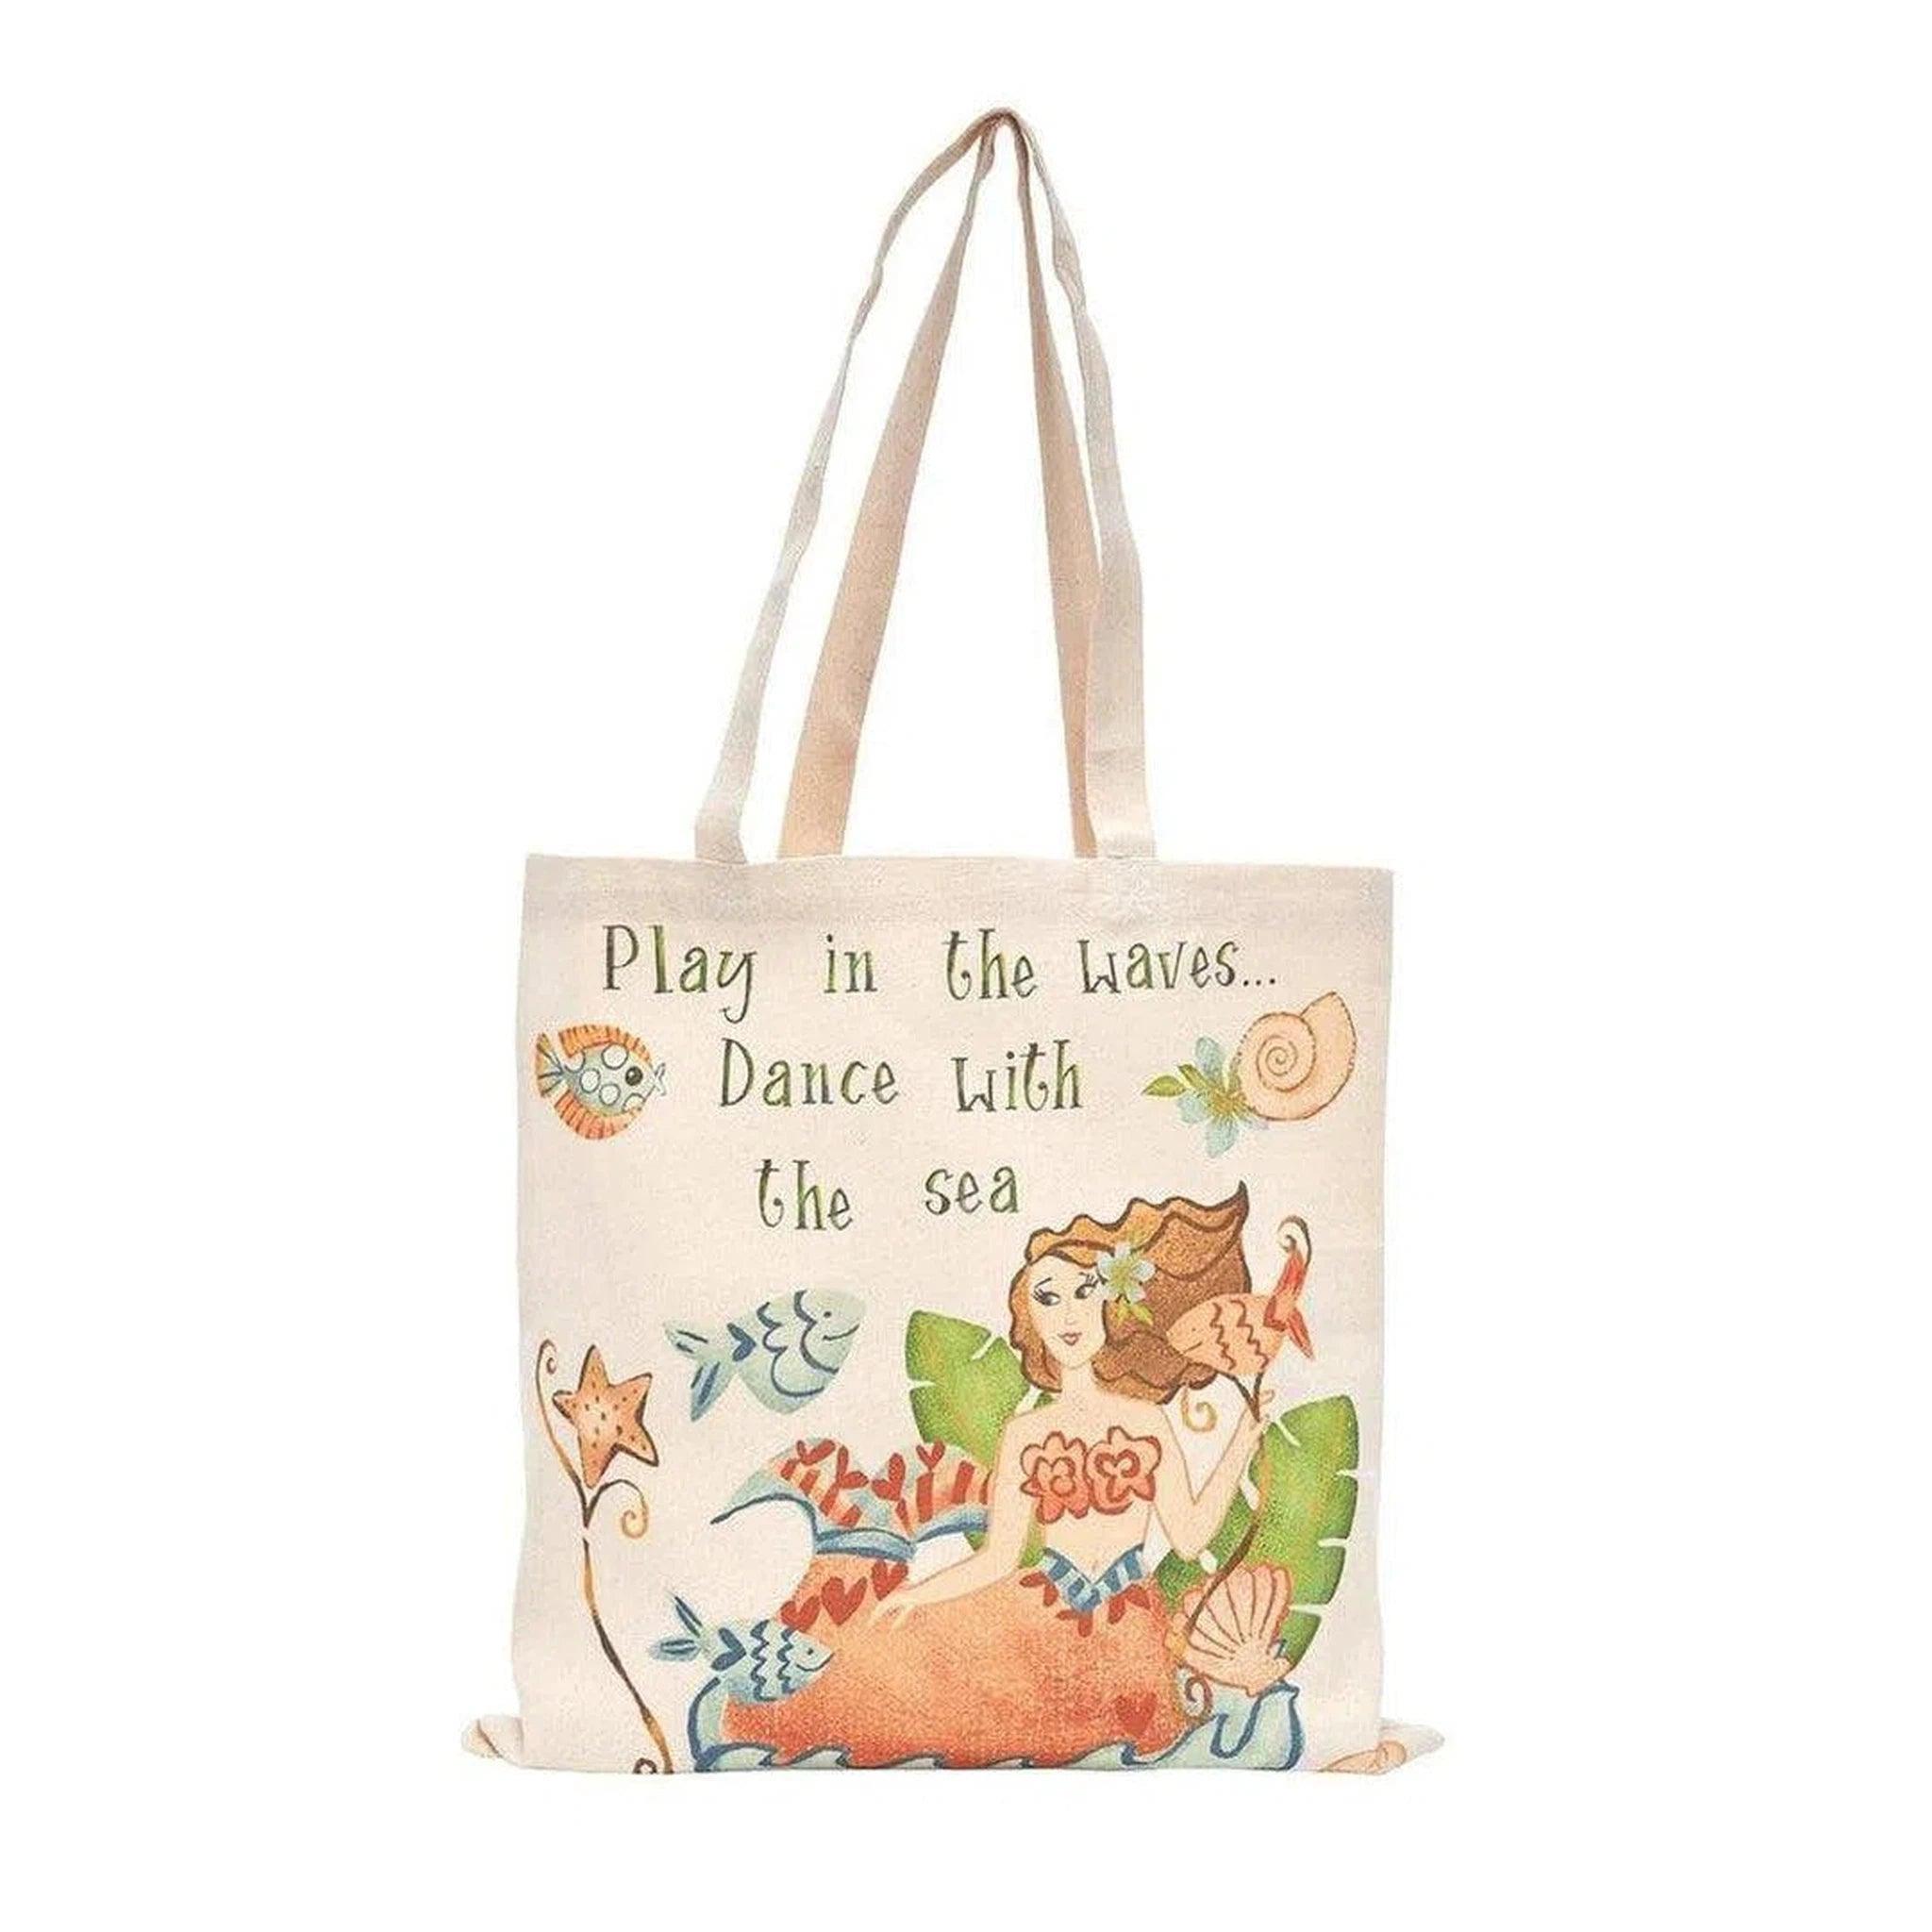 Play in the Waves, Dance with the Sea Mermaid Tote Bag